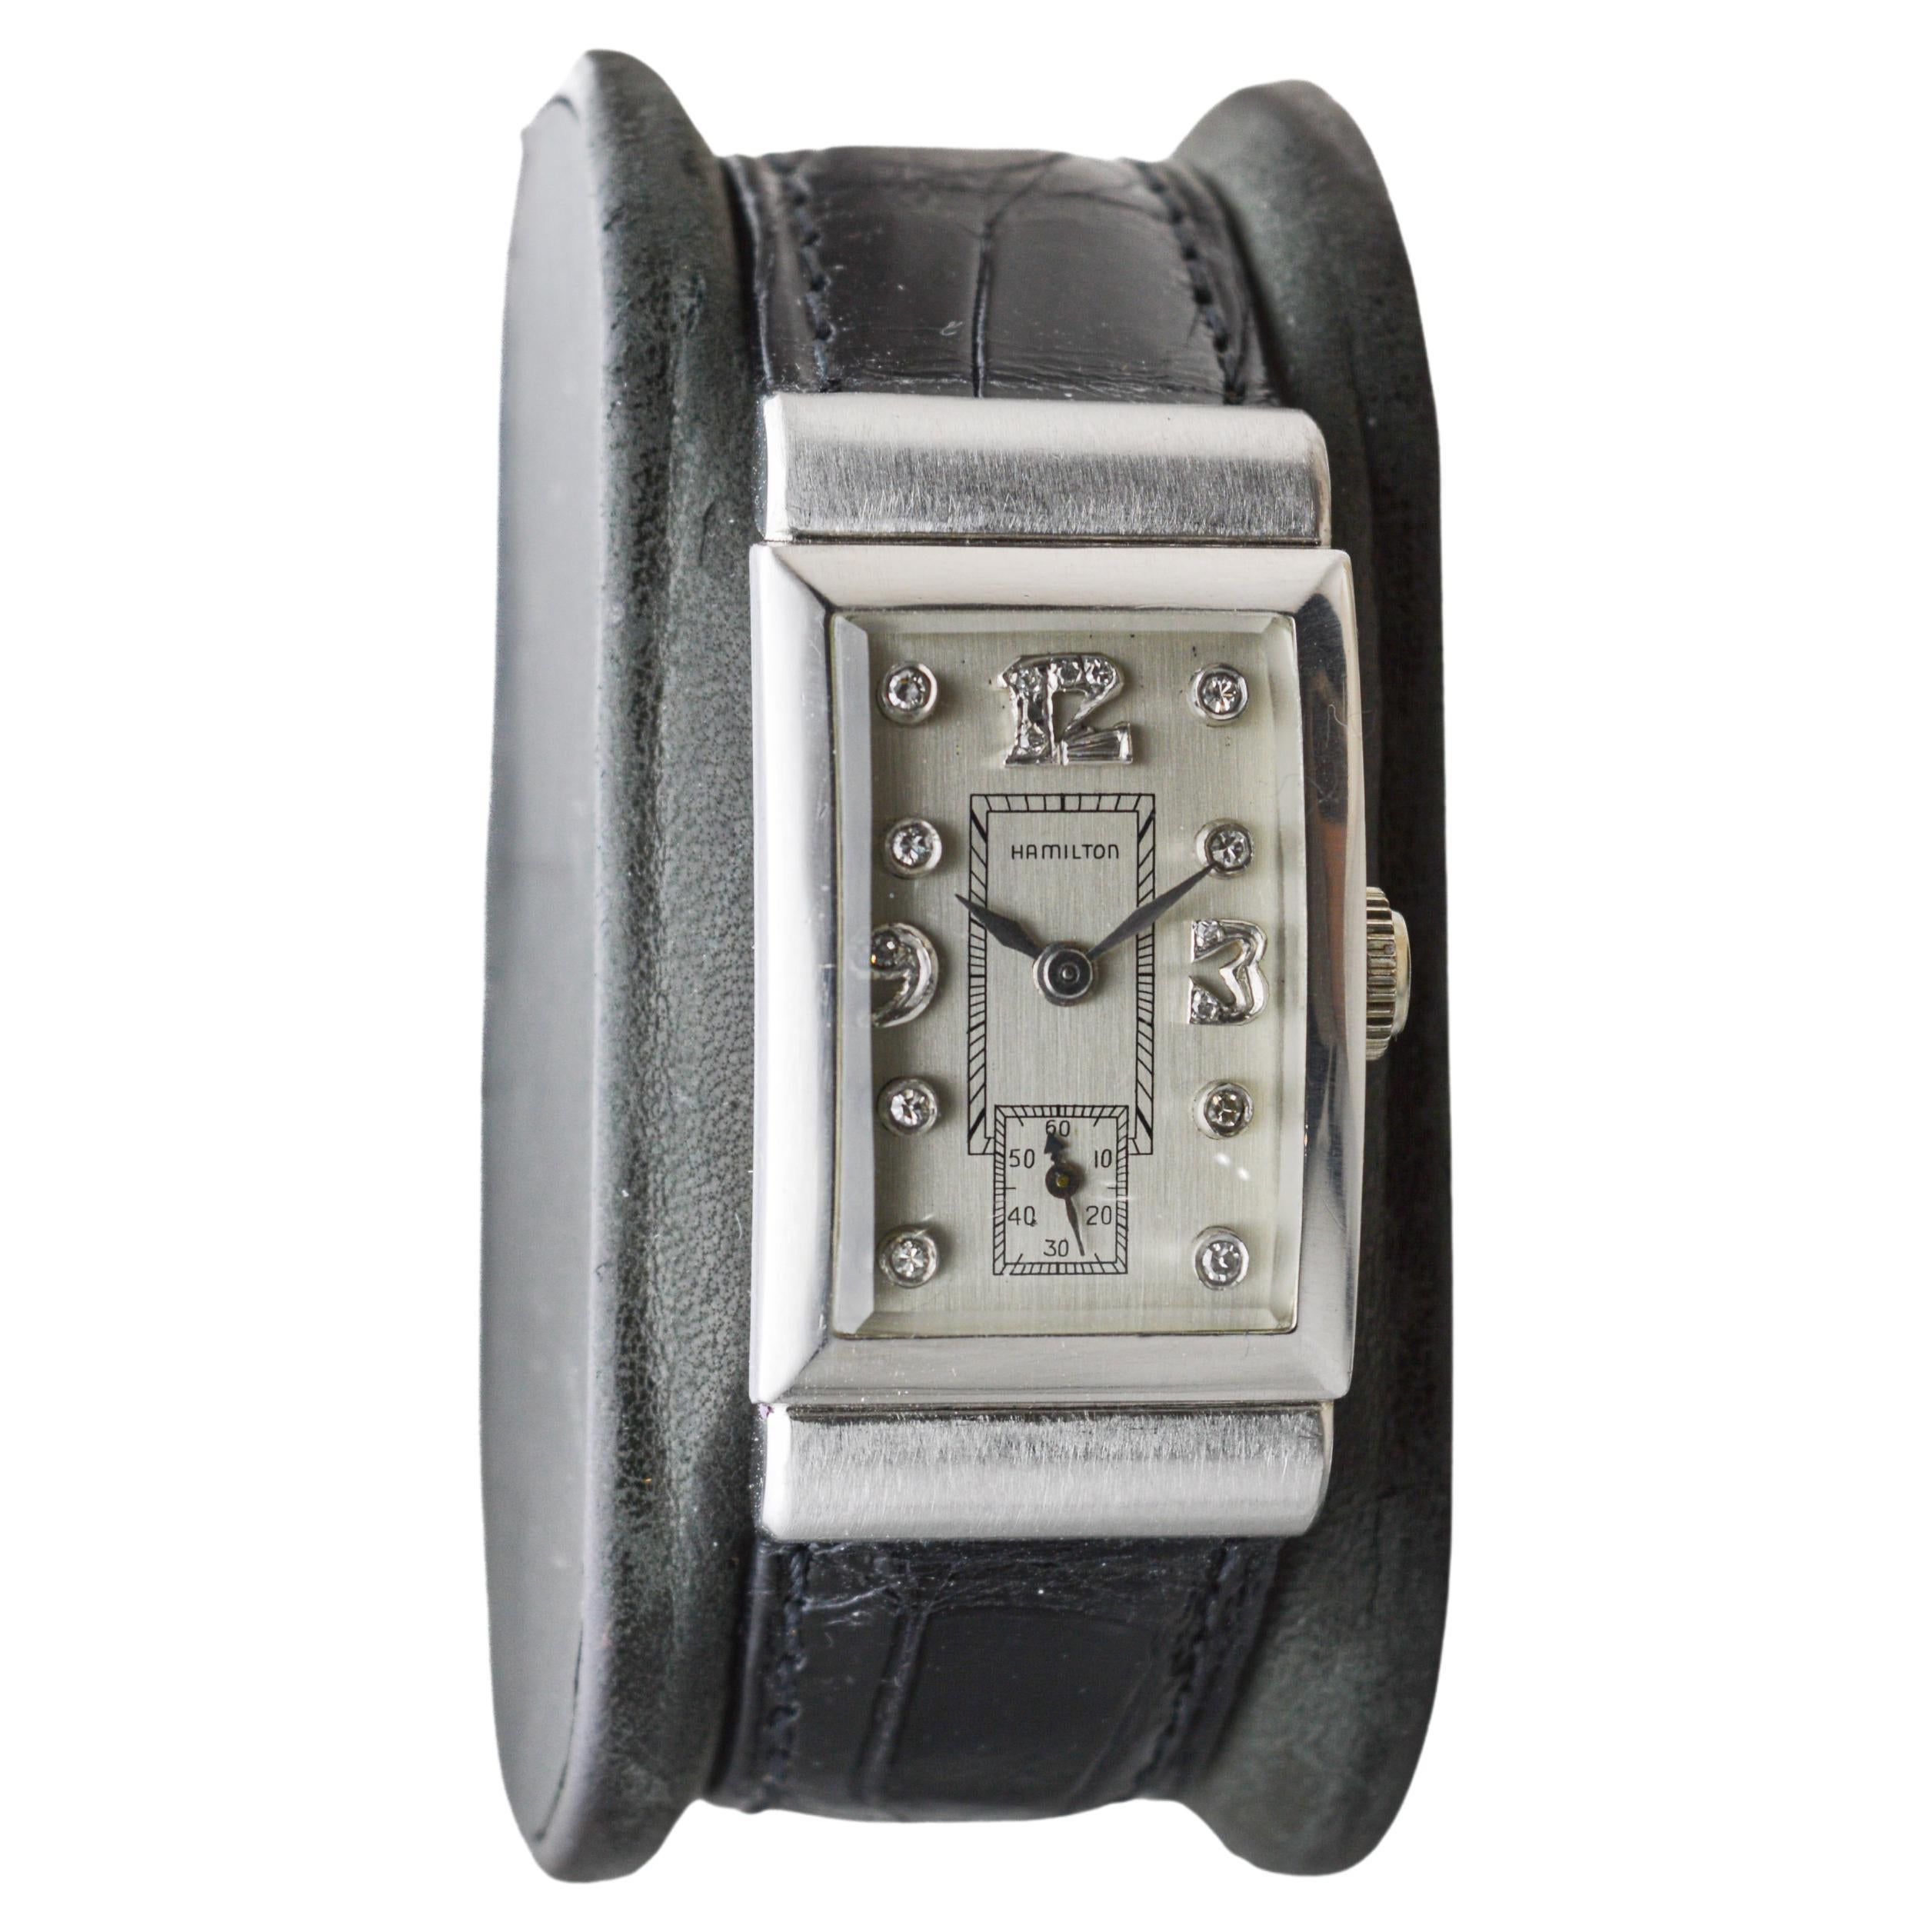 FACTORY / HOUSE: Hamilton Watch Company
STYLE / REFERENCE: Art Deco /Tank Style 
METAL / MATERIAL: Platinum
CIRCA / YEAR: 1940's 
DIMENSIONS / SIZE: Length 40mm X Width 21mm
MOVEMENT / CALIBER: Manual Winding / 19 Jewels / Caliber 982
DIAL / HANDS: